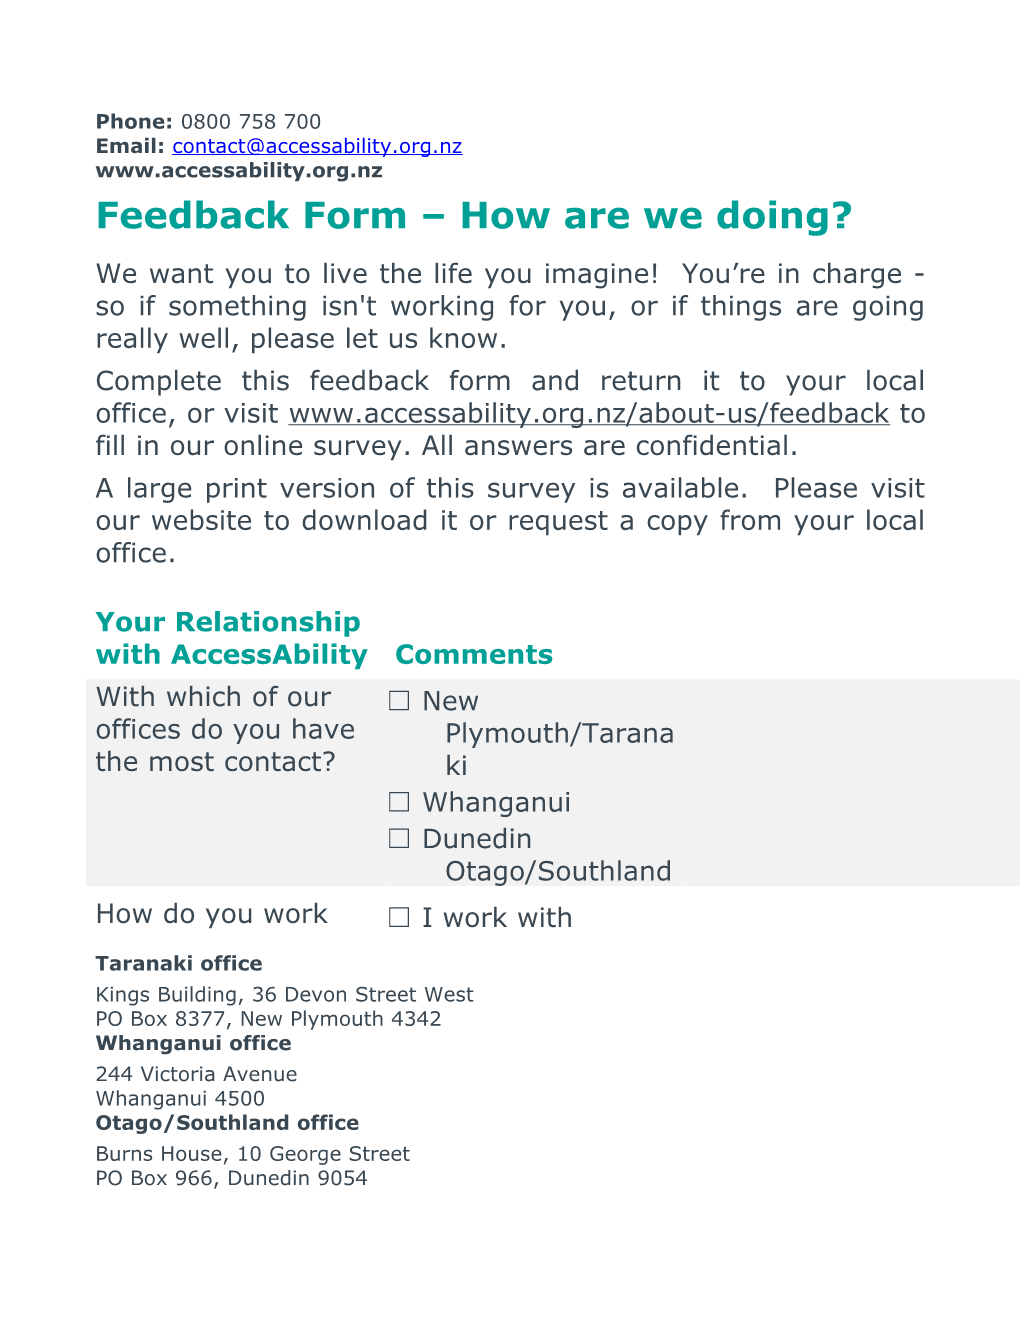 Feedback Form How Are We Doing?